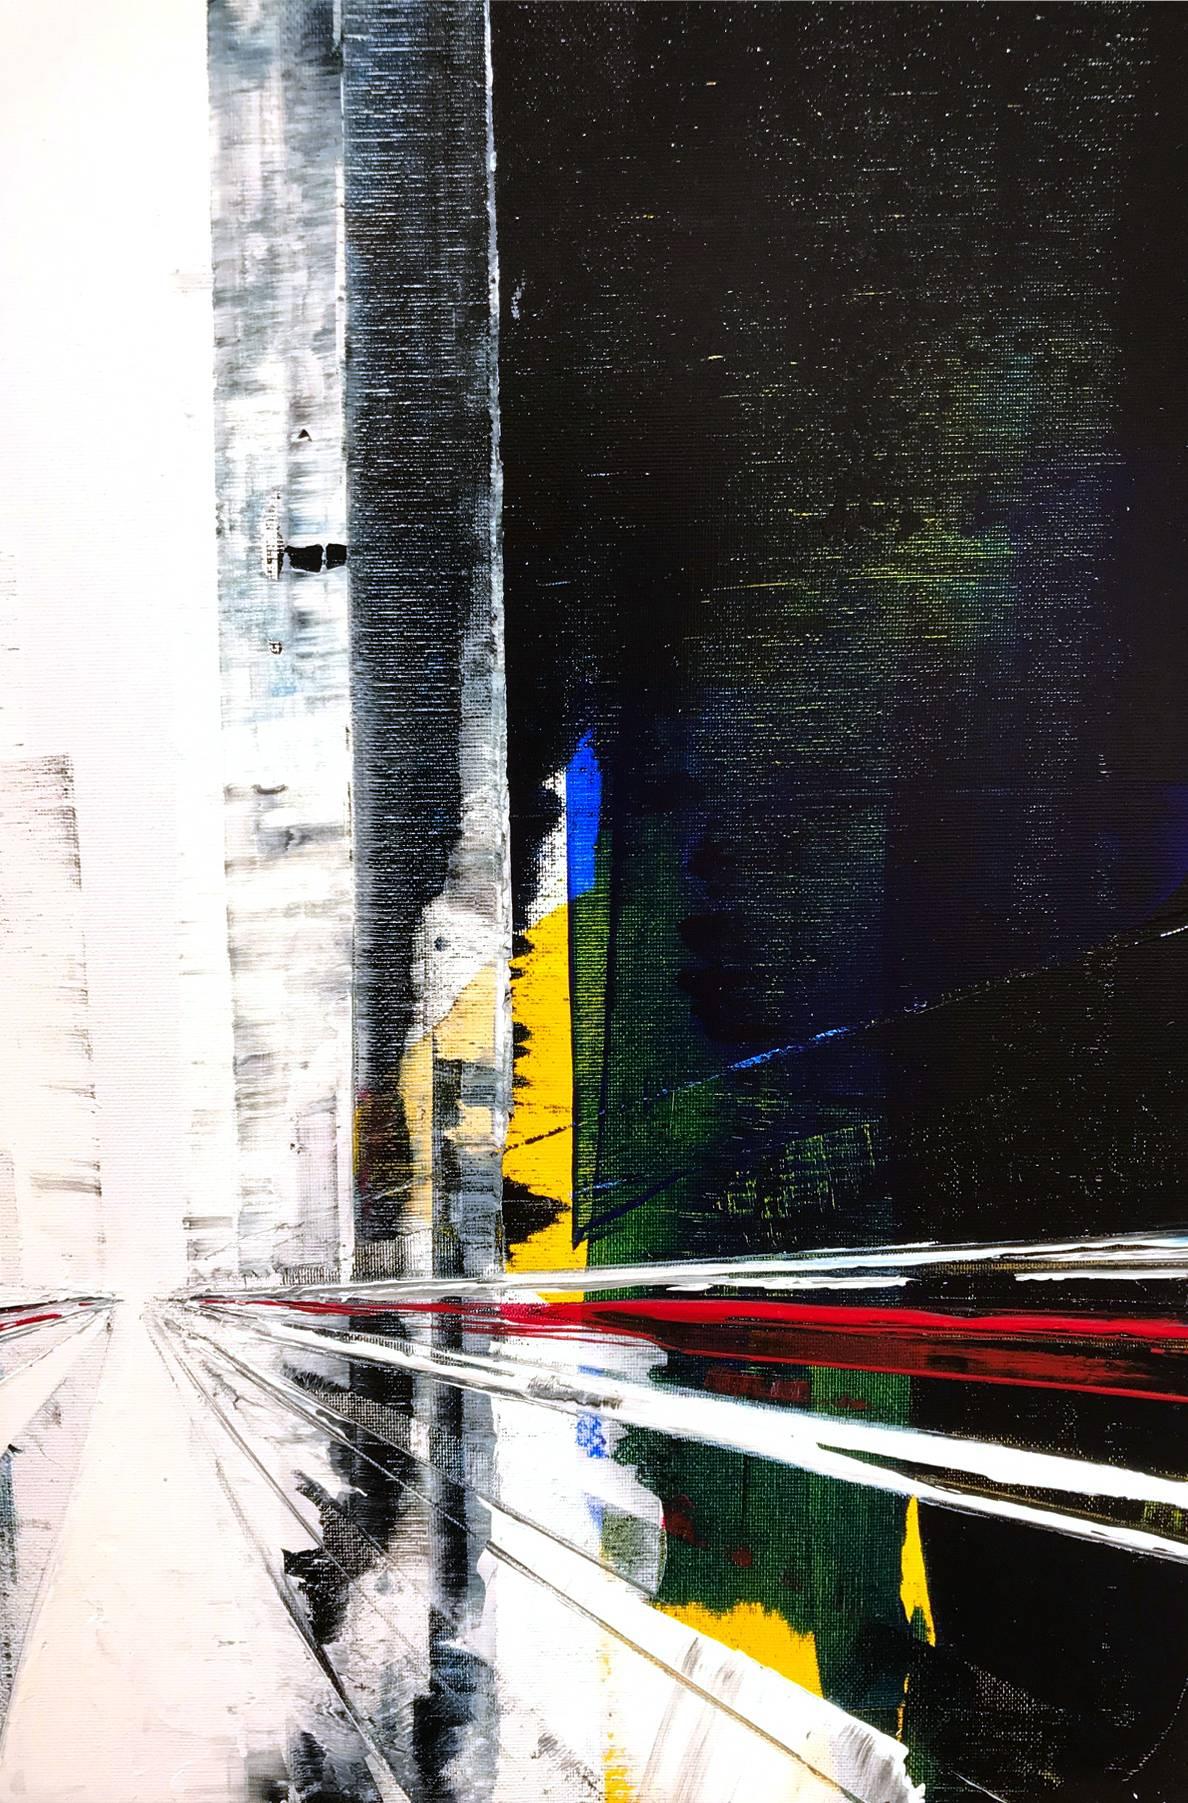 Johnnie Street  - Abstract Painting by Dulm